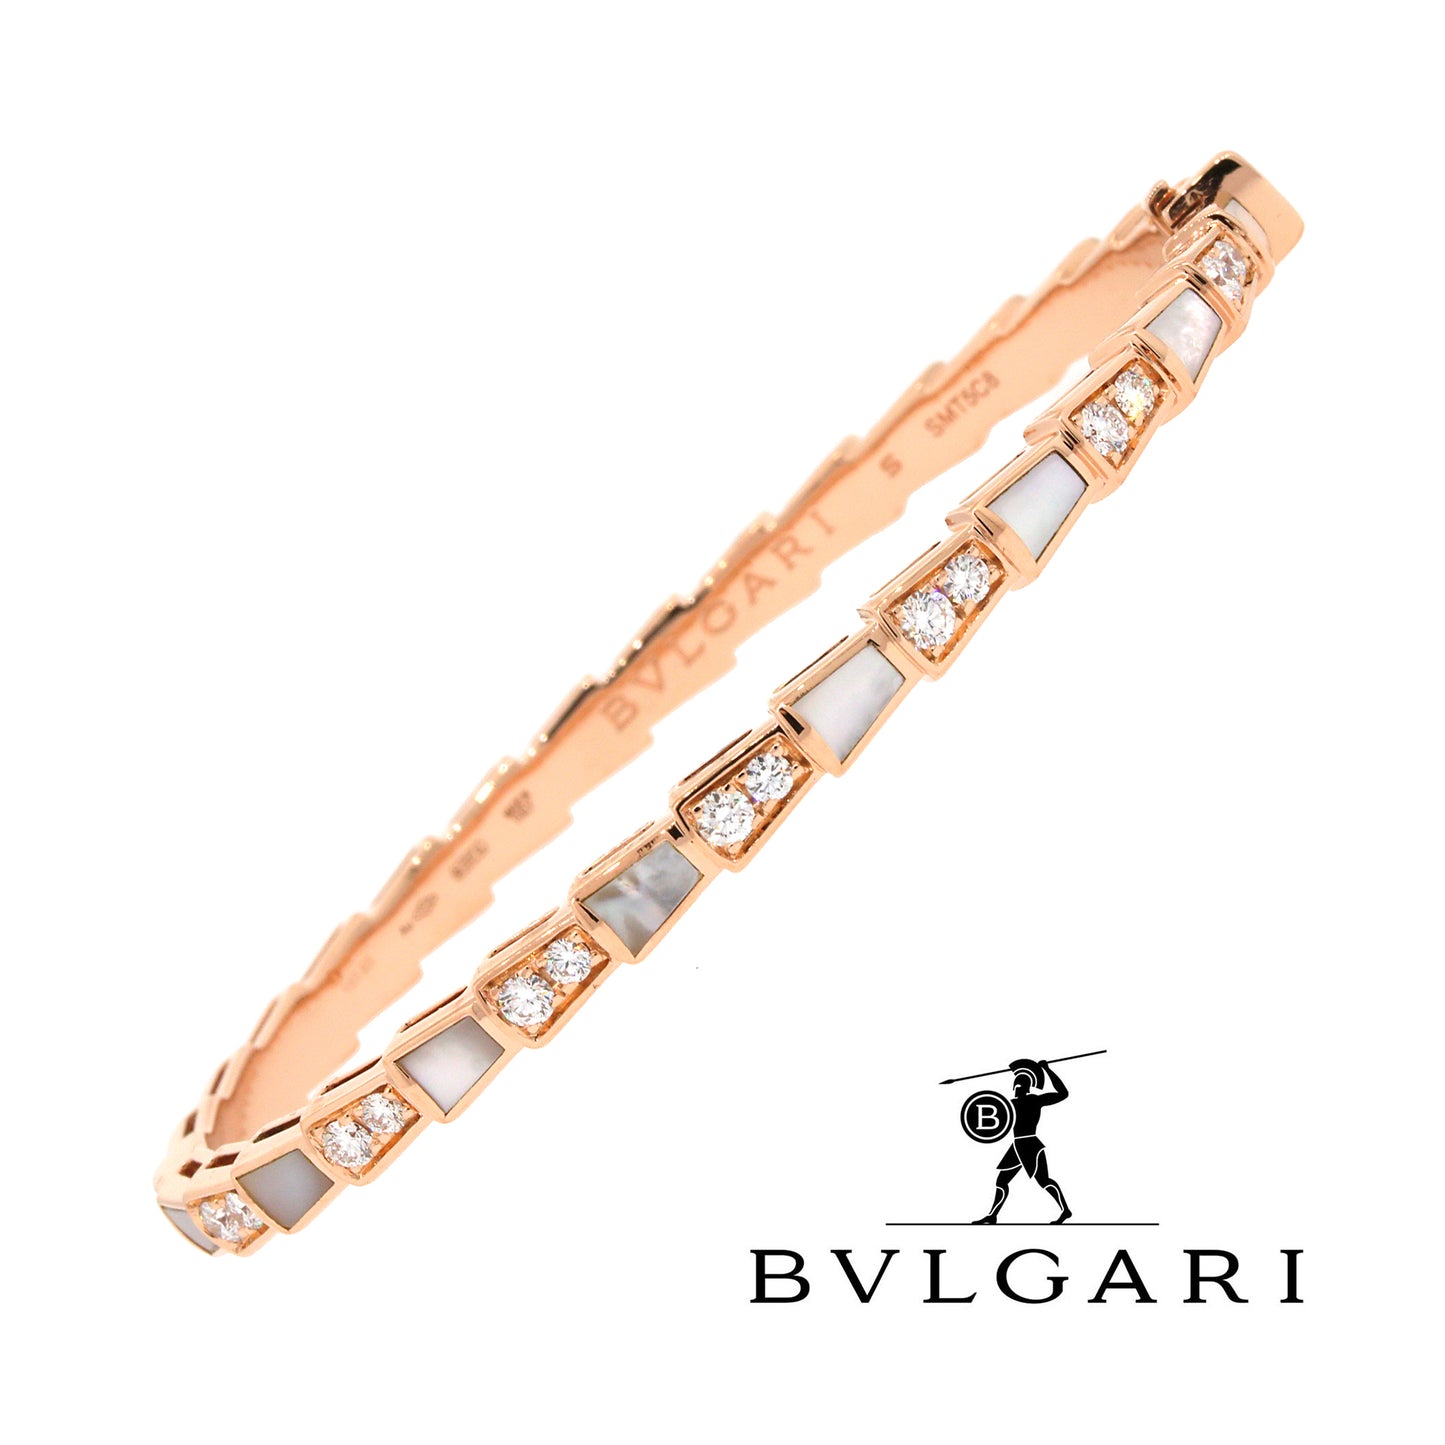 Pre-Owned Bvlgari Serpenti Viper Diamond Bracelet with Mother of Pearl